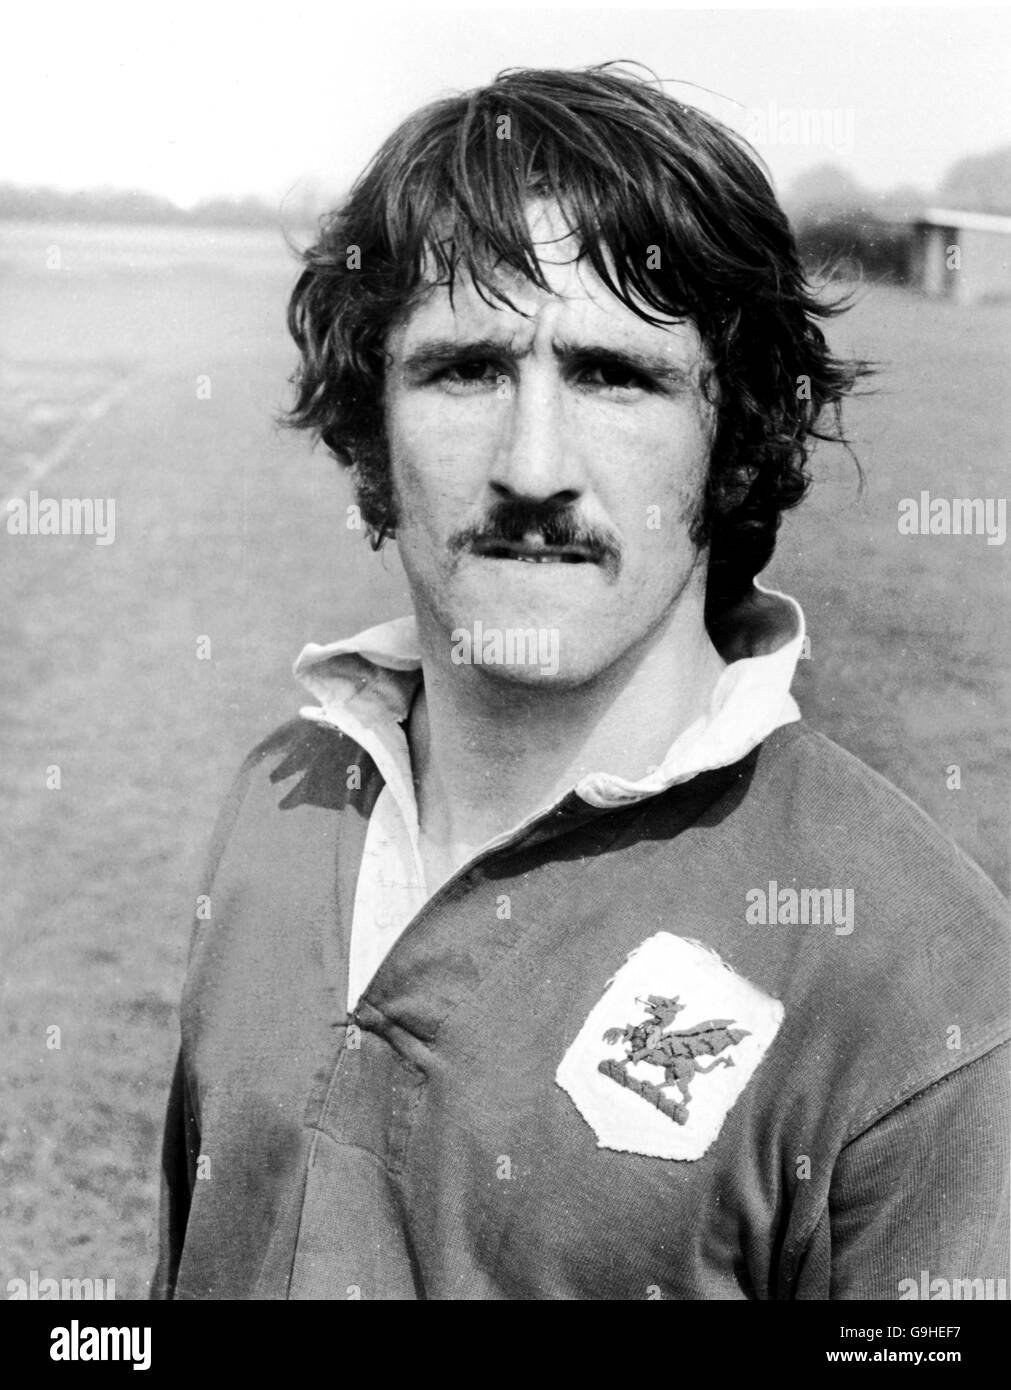 Rugby Union - London Welsh. Gerald Davies, London Welsh Stockfoto